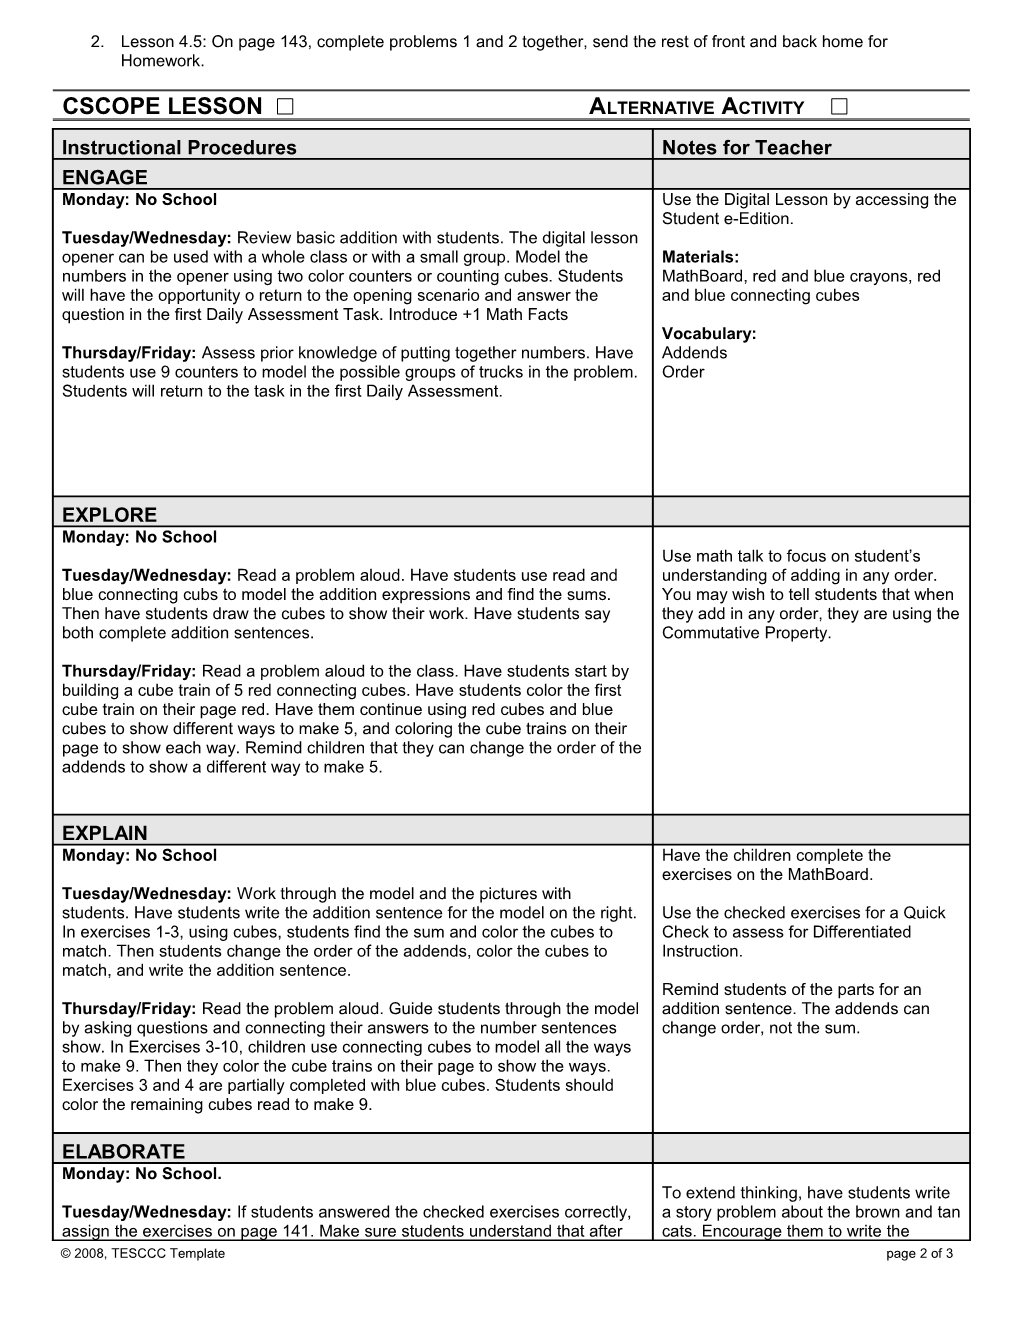 Cscope Lesson Plan Template s2